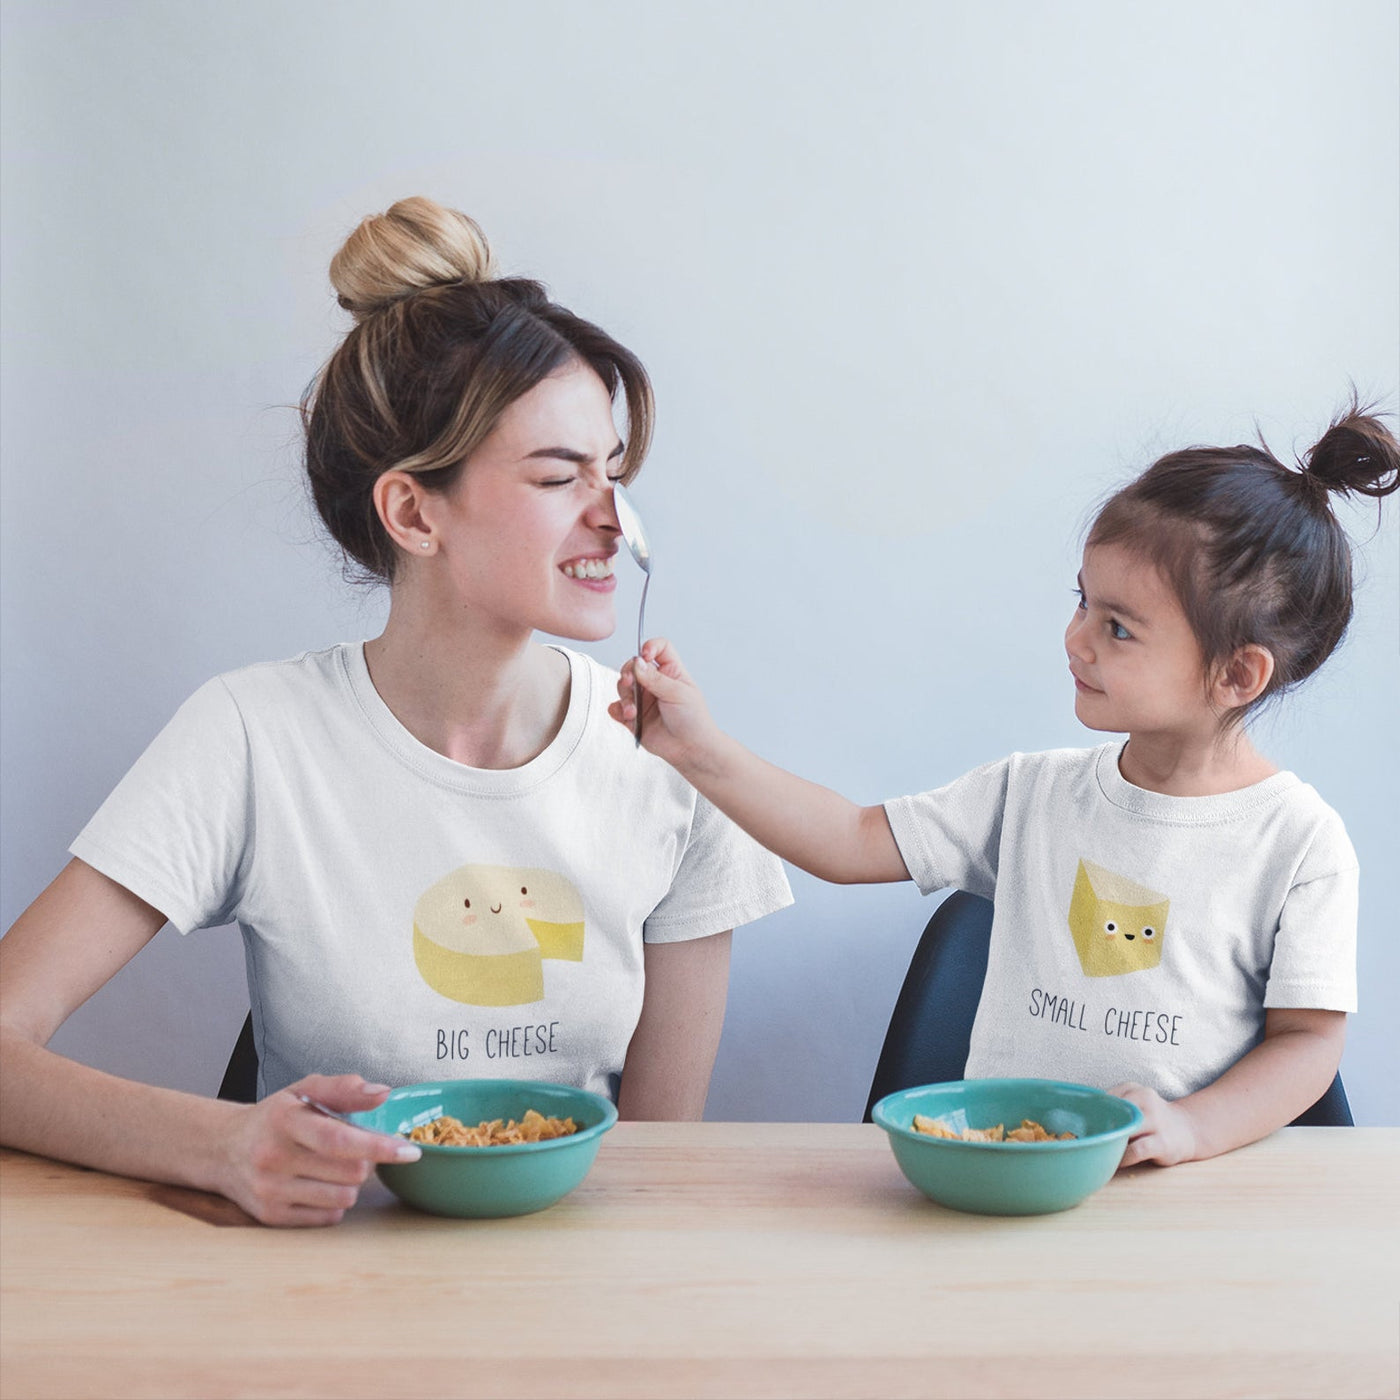 Mum & daughter in matching big cheese and little cheese tshirts